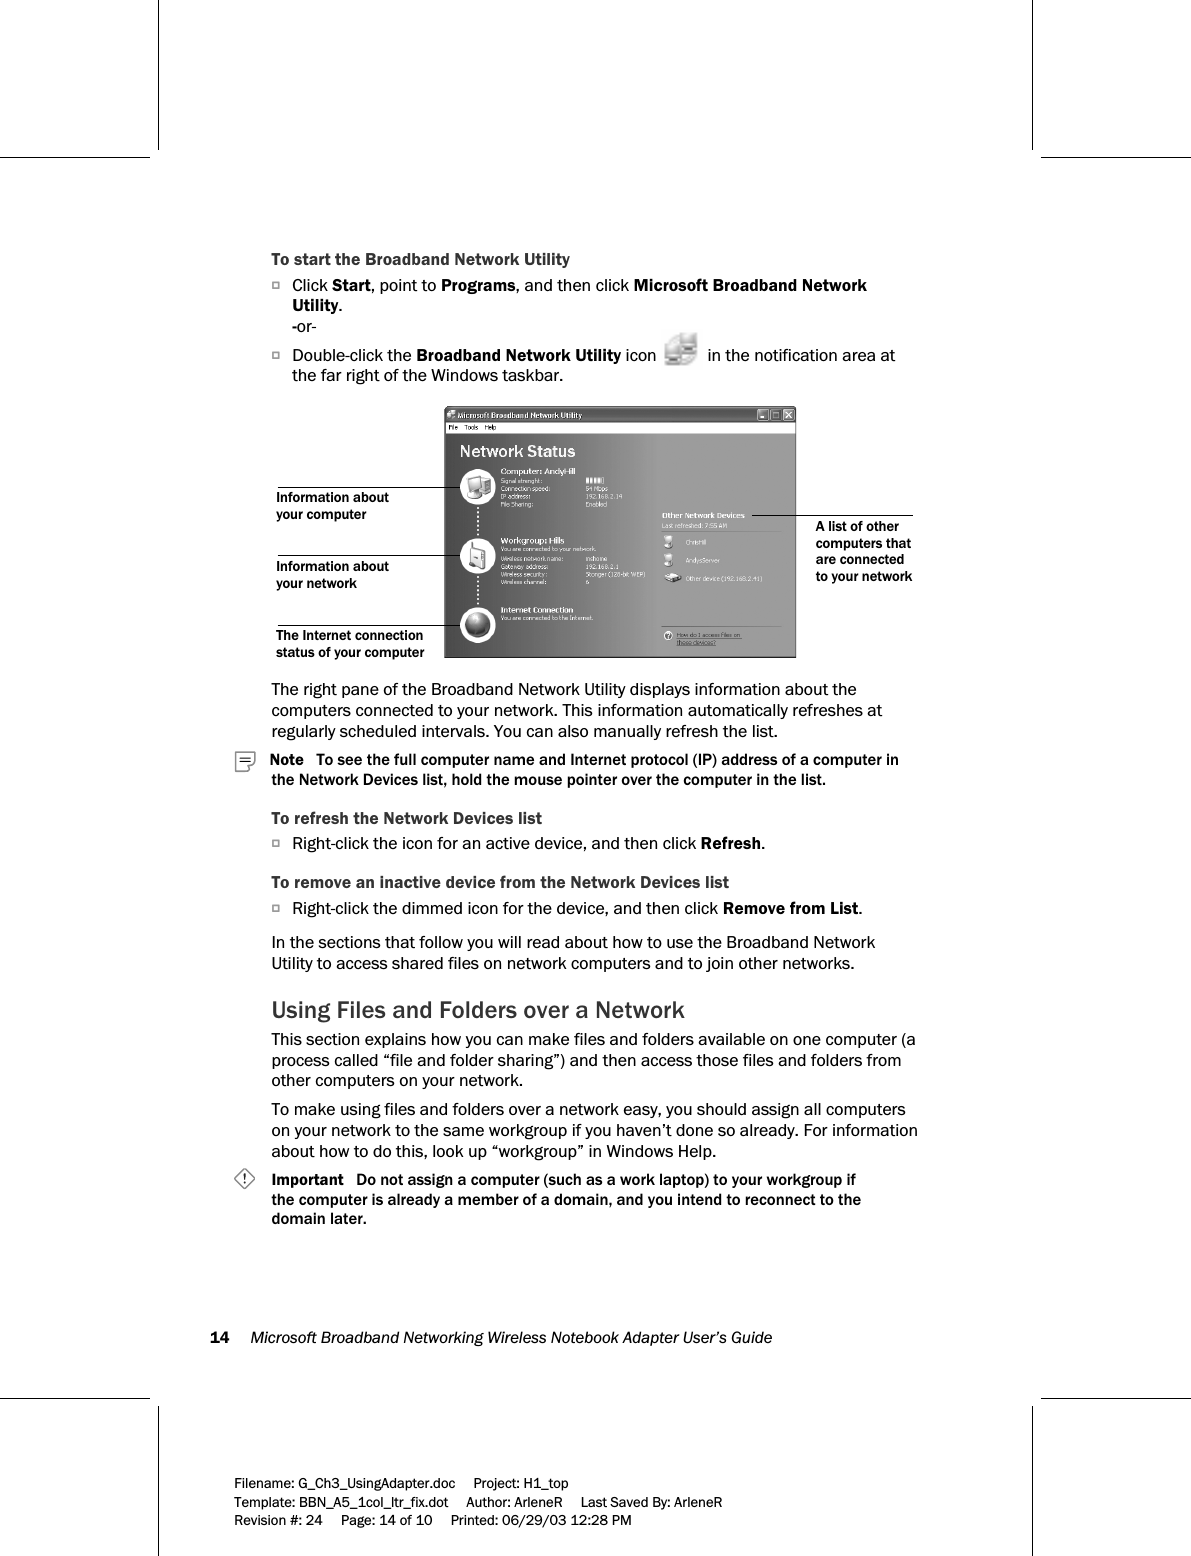 14     Microsoft Broadband Networking Wireless Notebook Adapter User’s Guide  Filename: G_Ch3_UsingAdapter.doc     Project: H1_top    Template: BBN_A5_1col_ltr_fix.dot     Author: ArleneR     Last Saved By: ArleneR Revision #: 24     Page: 14 of 10     Printed: 06/29/03 12:28 PM  To start the Broadband Network Utility OClick Start, point to Programs, and then click Microsoft Broadband Network Utility. -or- ODouble-click the Broadband Network Utility icon   in the notification area at the far right of the Windows taskbar.  Information about your networkThe Internet connection status of your computerA list of other computers that are connected to your networkInformation about your computer  The right pane of the Broadband Network Utility displays information about the computers connected to your network. This information automatically refreshes at regularly scheduled intervals. You can also manually refresh the list.    Note   To see the full computer name and Internet protocol (IP) address of a computer in the Network Devices list, hold the mouse pointer over the computer in the list. To refresh the Network Devices list ORight-click the icon for an active device, and then click Refresh. To remove an inactive device from the Network Devices list ORight-click the dimmed icon for the device, and then click Remove from List.  In the sections that follow you will read about how to use the Broadband Network Utility to access shared files on network computers and to join other networks. Using Files and Folders over a Network This section explains how you can make files and folders available on one computer (a process called “file and folder sharing”) and then access those files and folders from other computers on your network.  To make using files and folders over a network easy, you should assign all computers on your network to the same workgroup if you haven’t done so already. For information about how to do this, look up “workgroup” in Windows Help.     Important   Do not assign a computer (such as a work laptop) to your workgroup if  the computer is already a member of a domain, and you intend to reconnect to the domain later. 